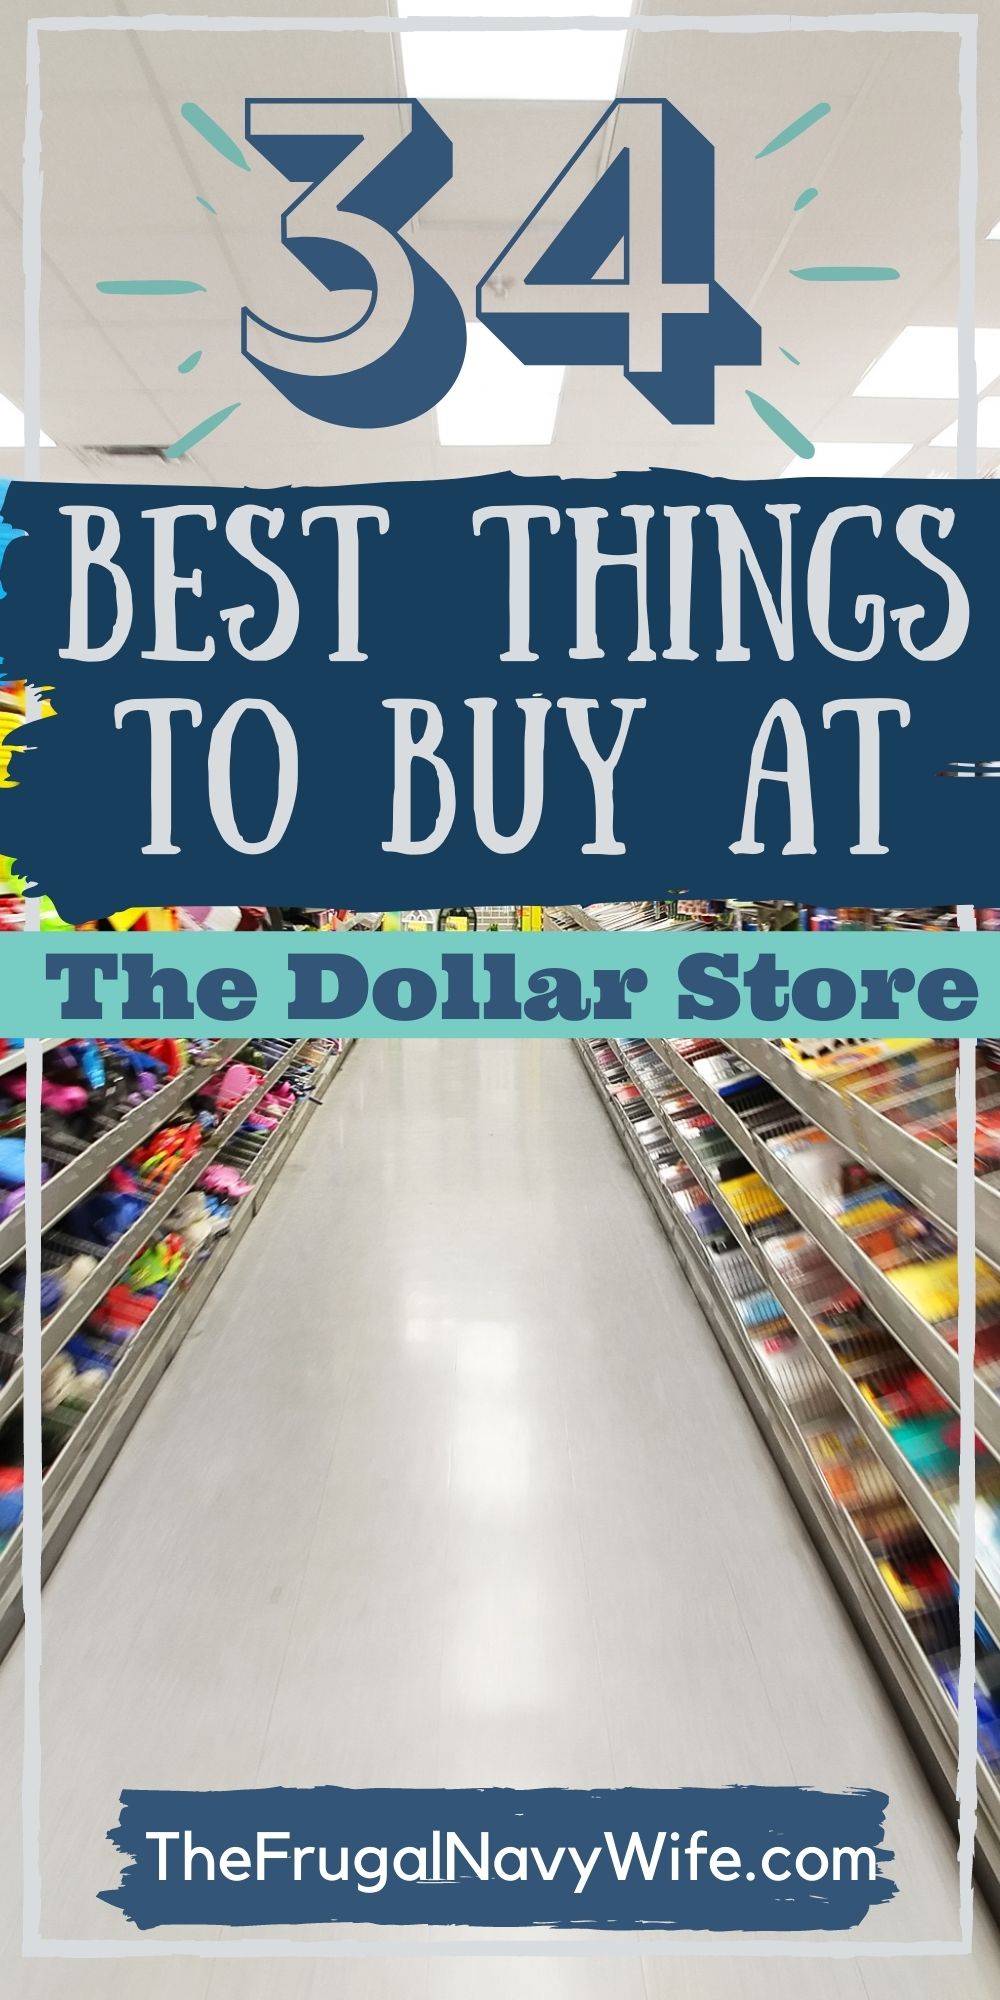 20 Items to Never Buy at the Dollar Stores - The Frugal Navy Wife